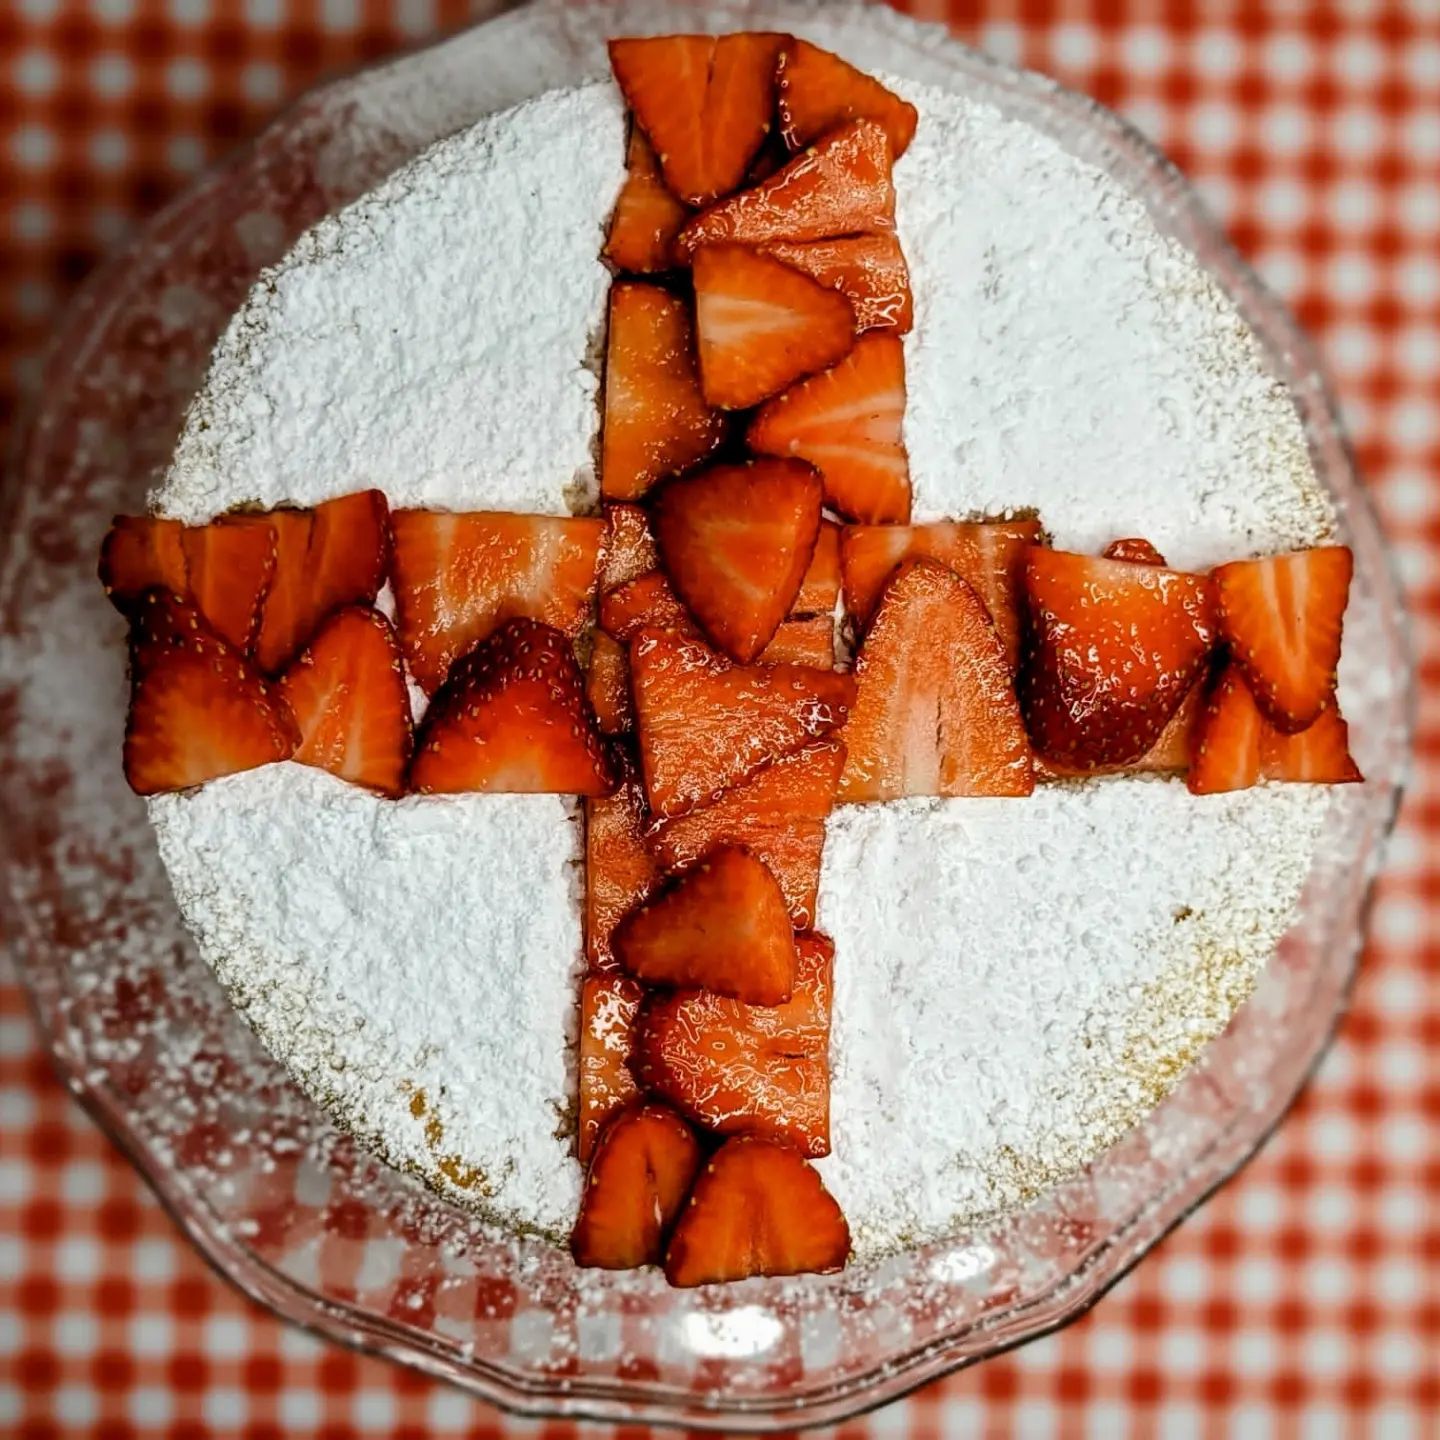 TV Jubilee Pudding winner Jemma Melvin has celebrated the England Lionesses stunning Euro 2022 victory by creating a special St Georges cake